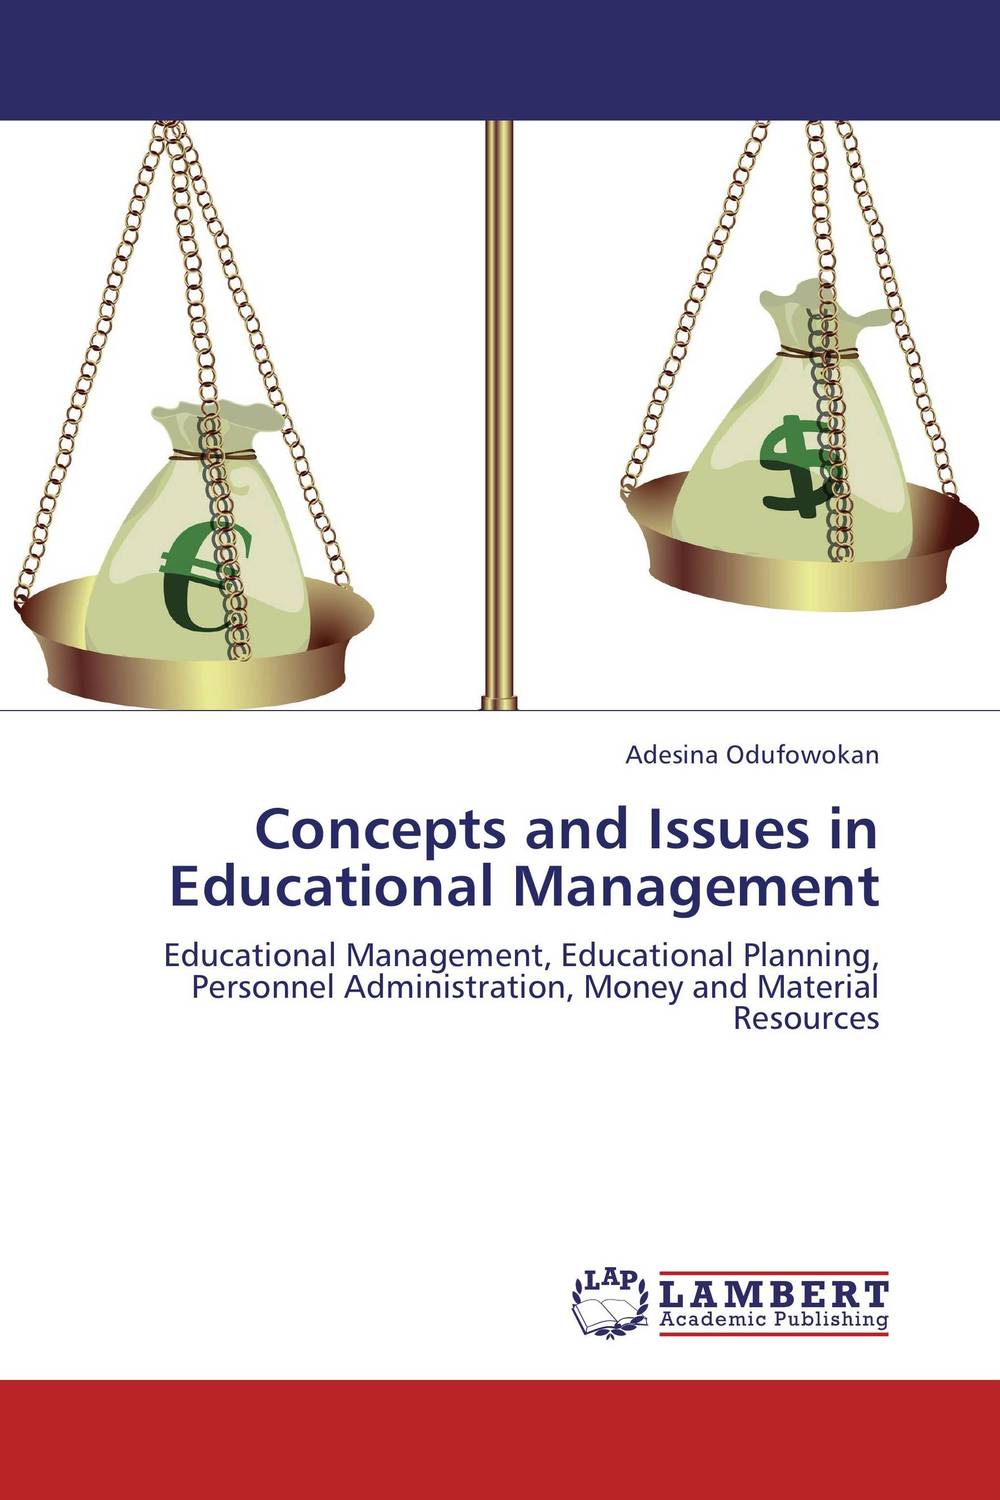 Concepts and Issues in Educational Management